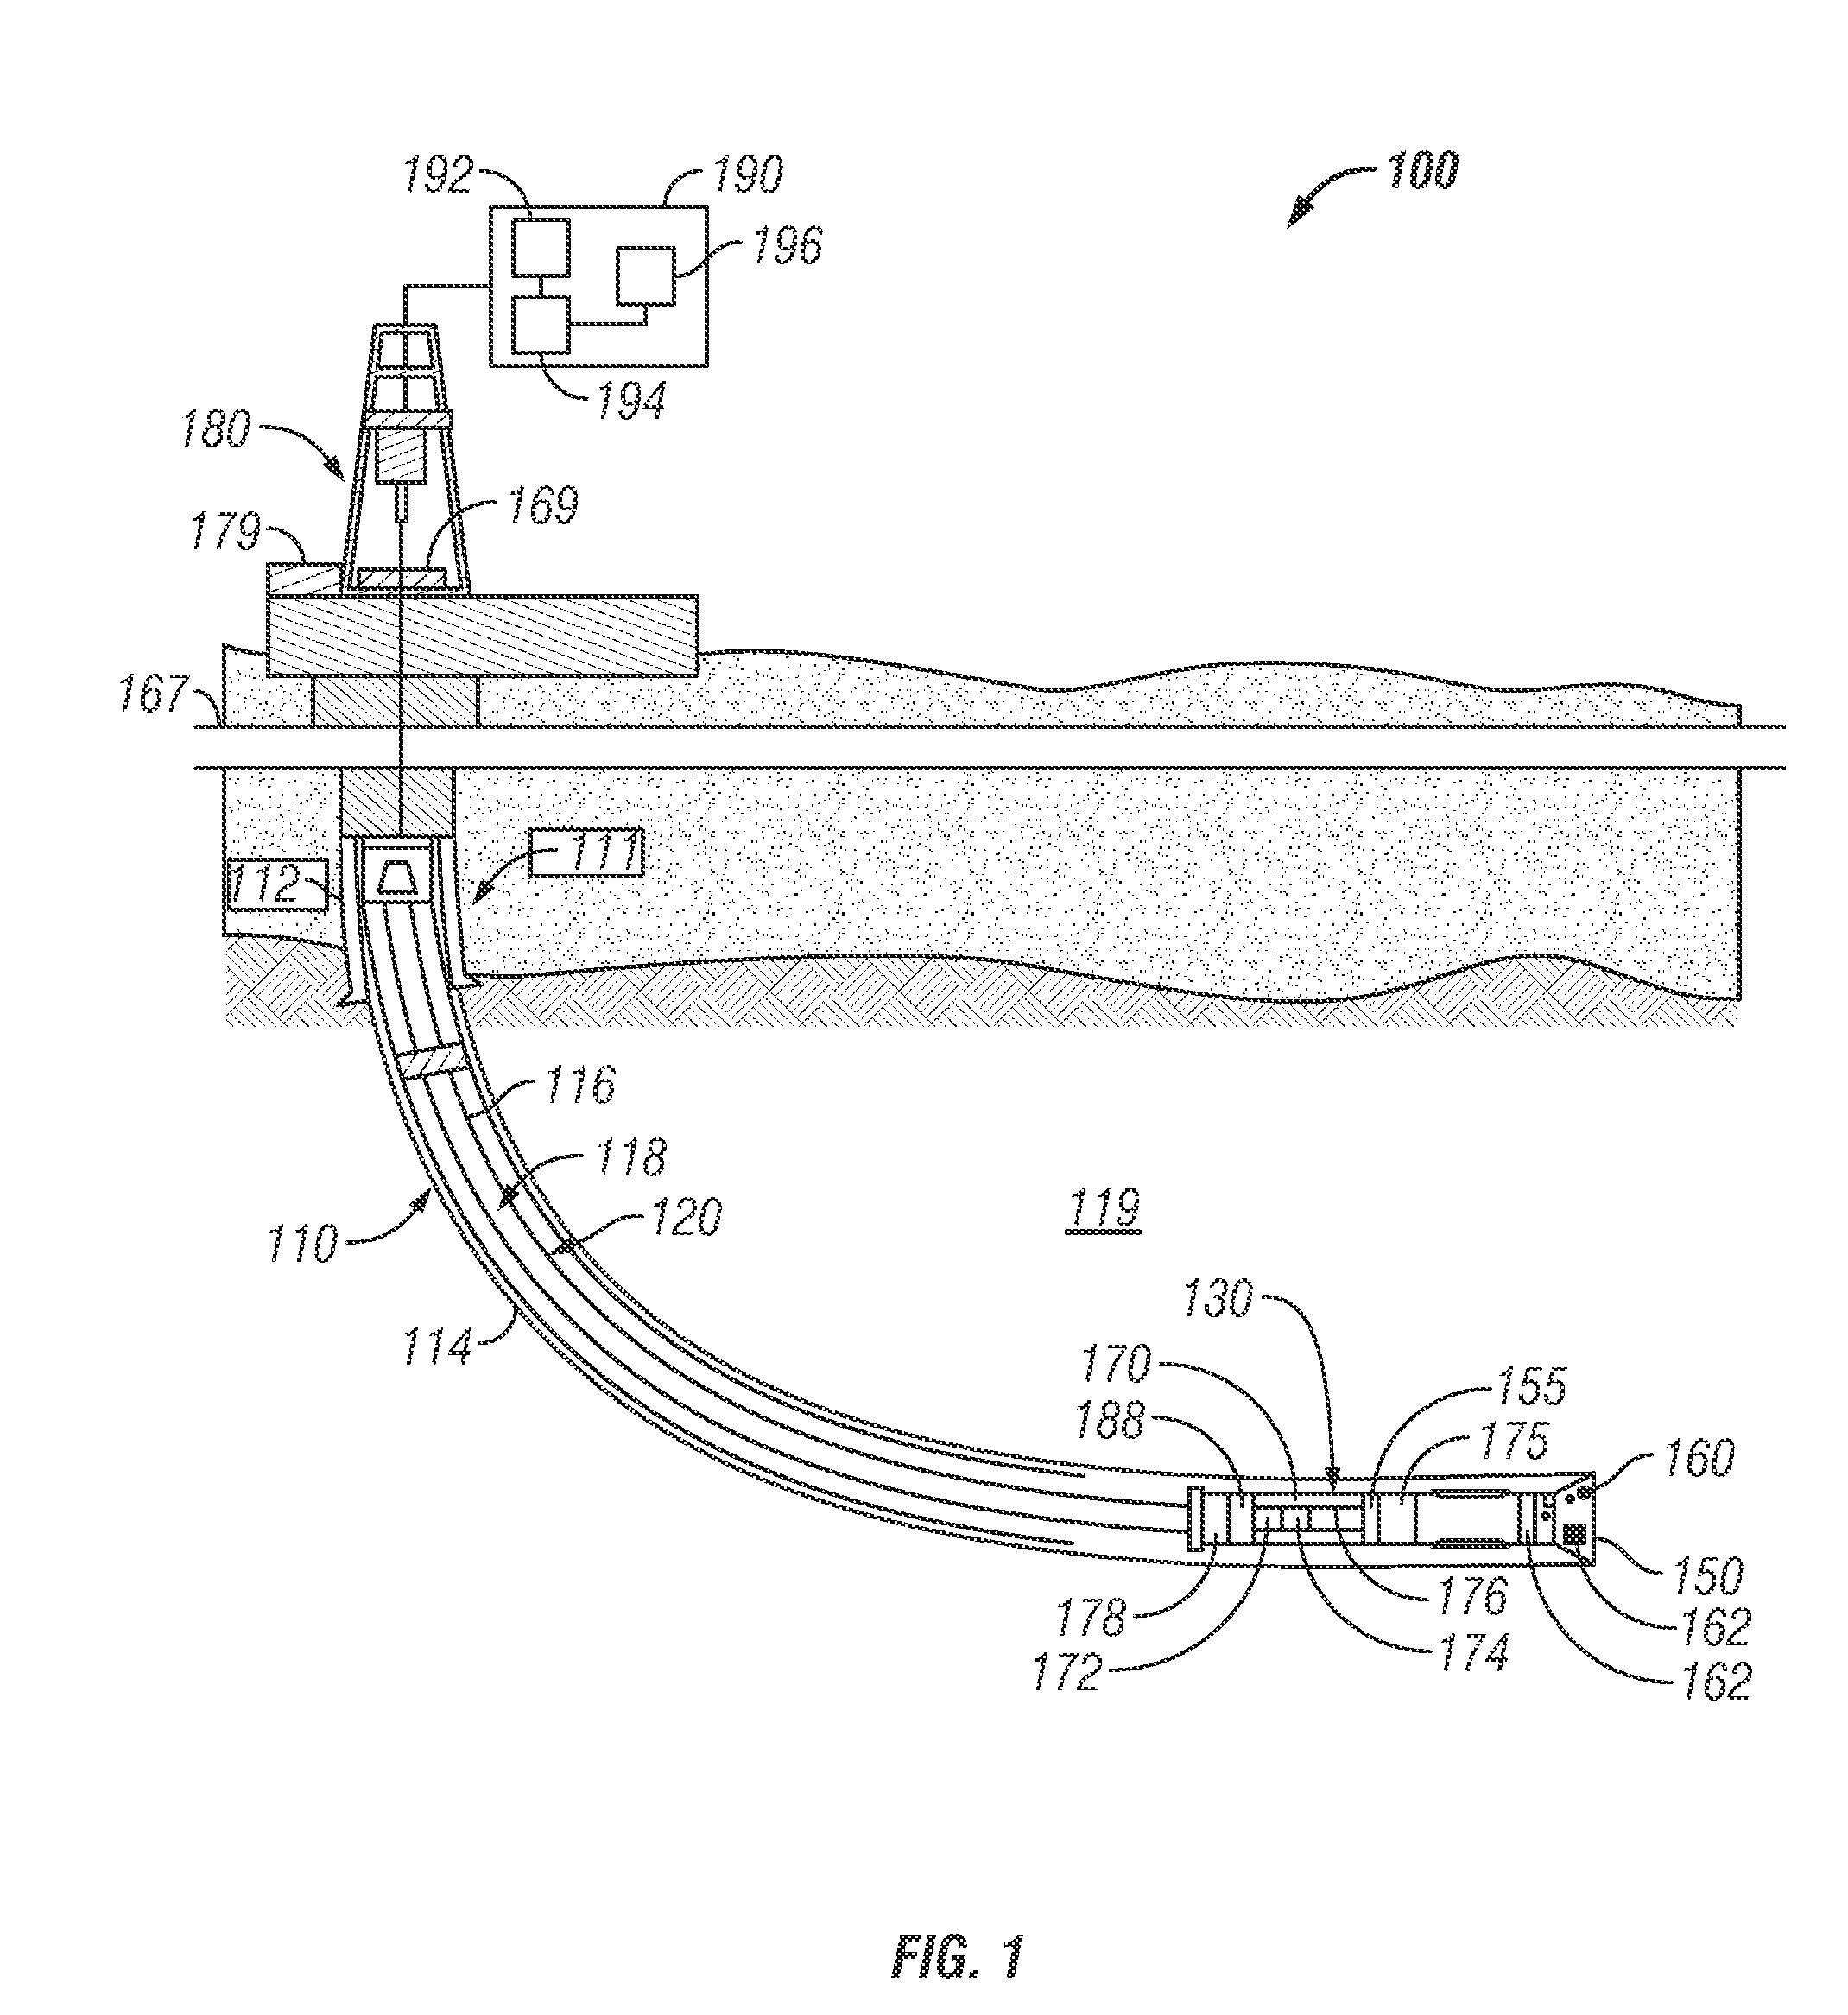 Formation Evaluation Using a Bit-Based Active Radiation Source and a Gamma Ray Detector